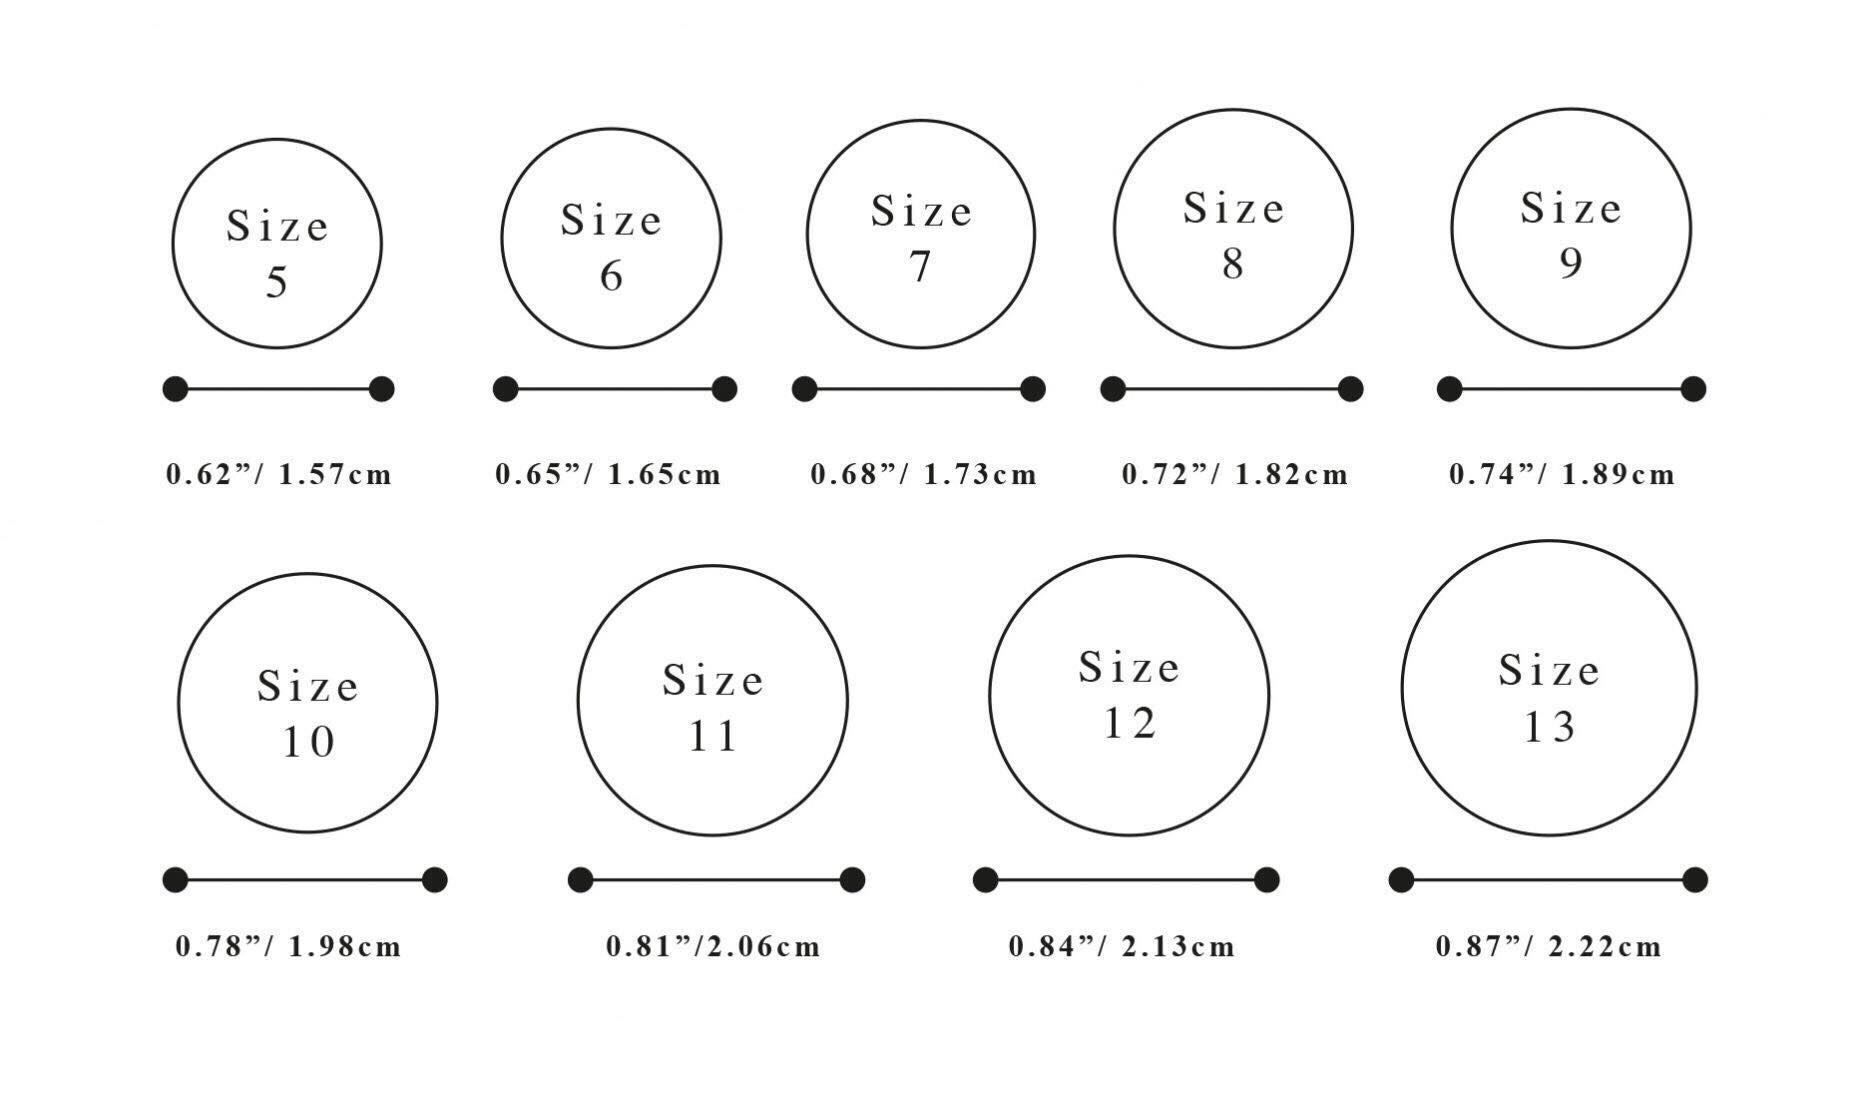 Ring Sizes Chart The Dead Bird Jewelry